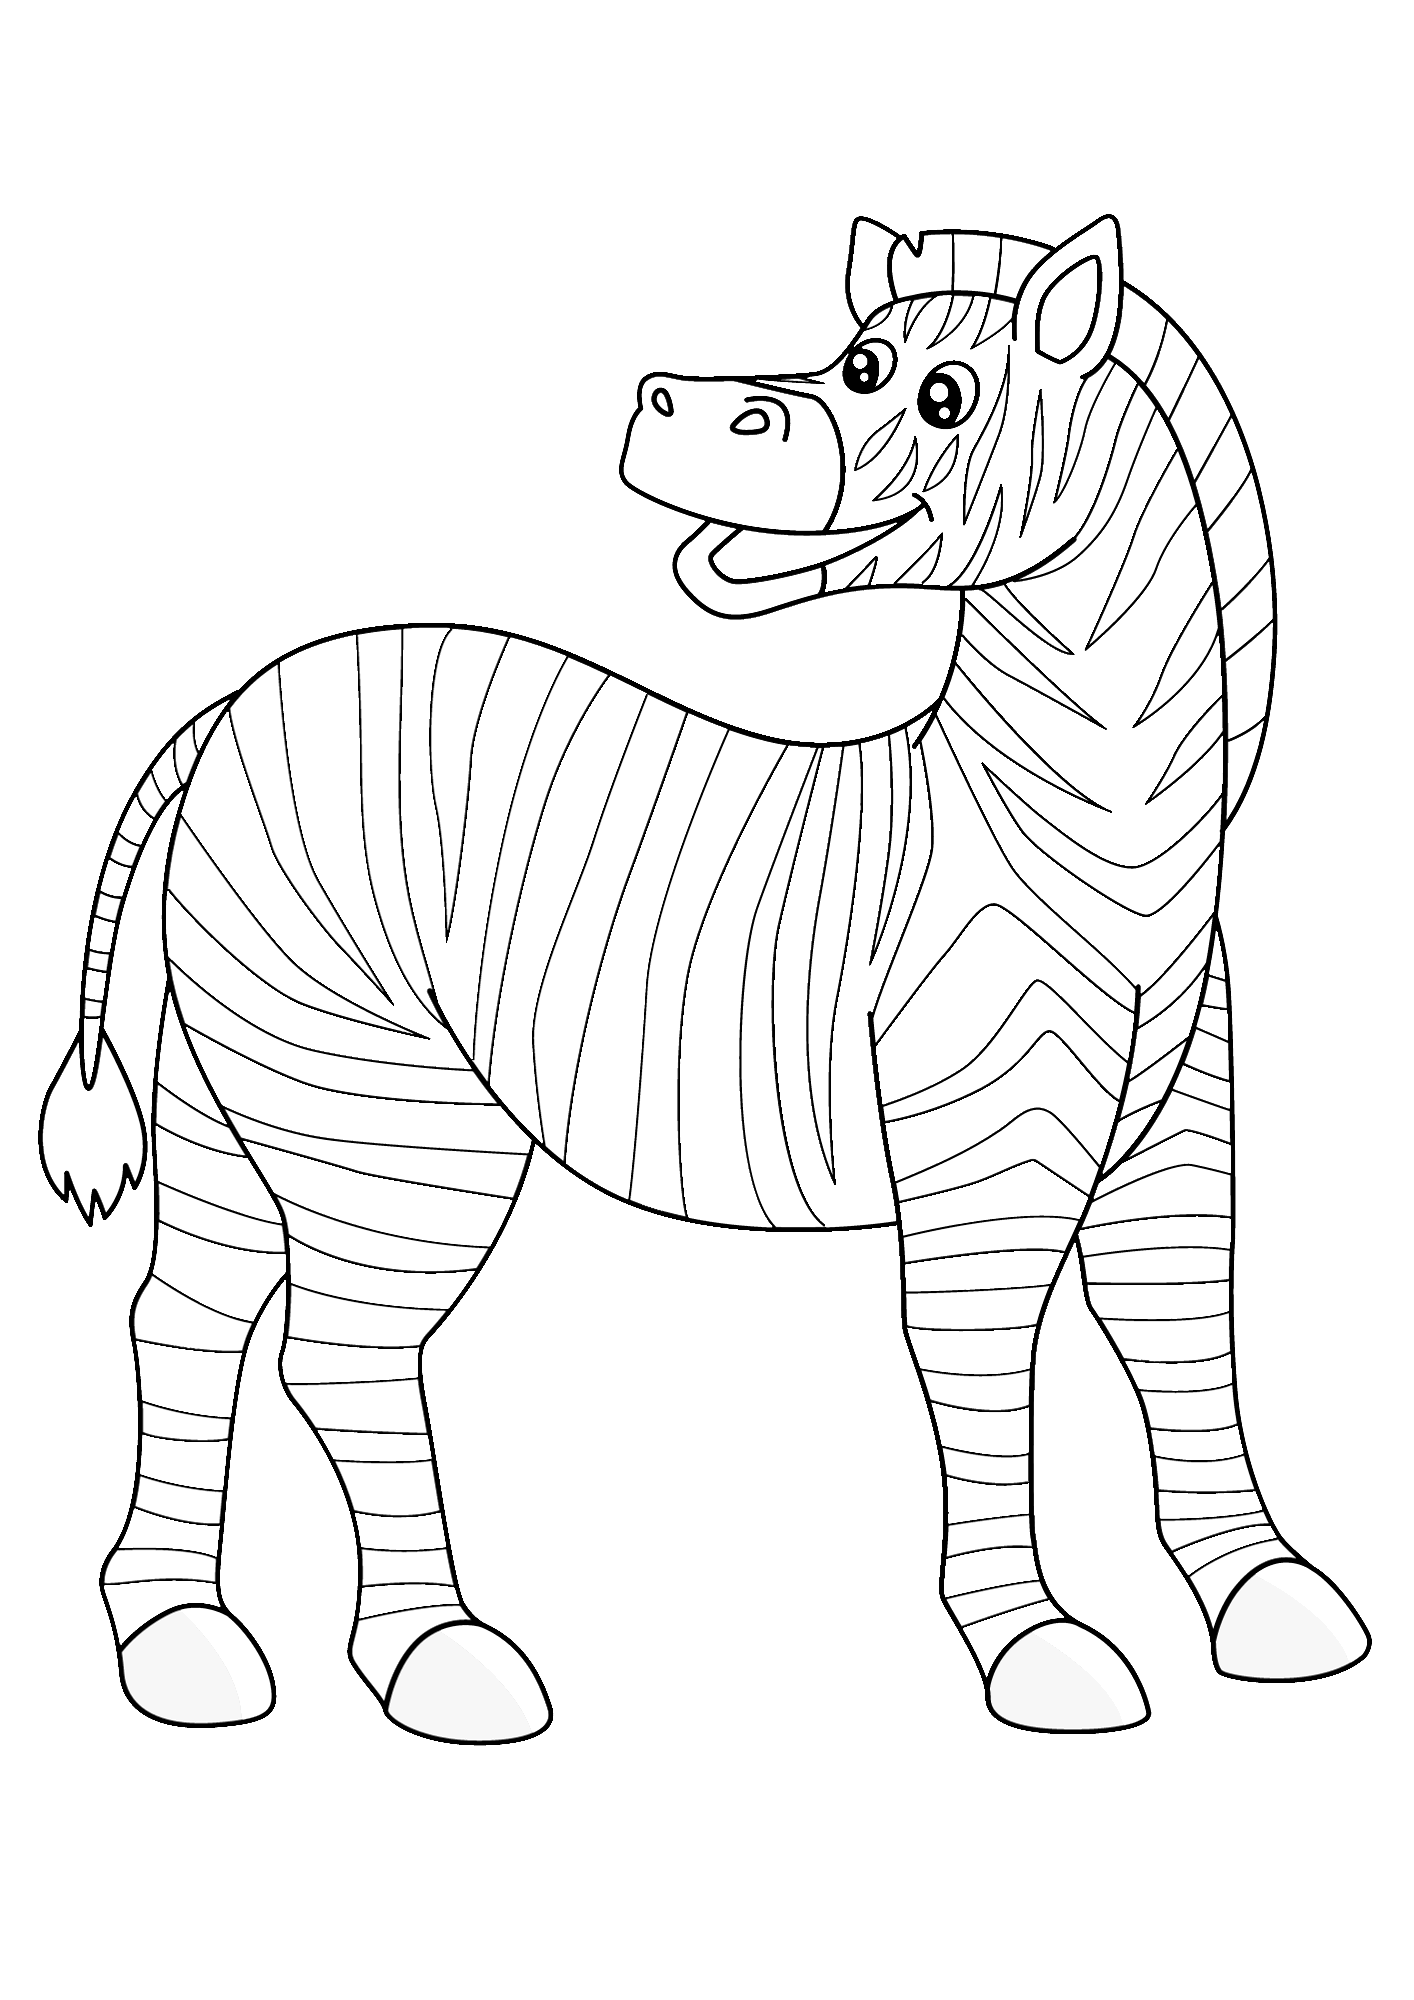 Zebra Smile Coloring Pages